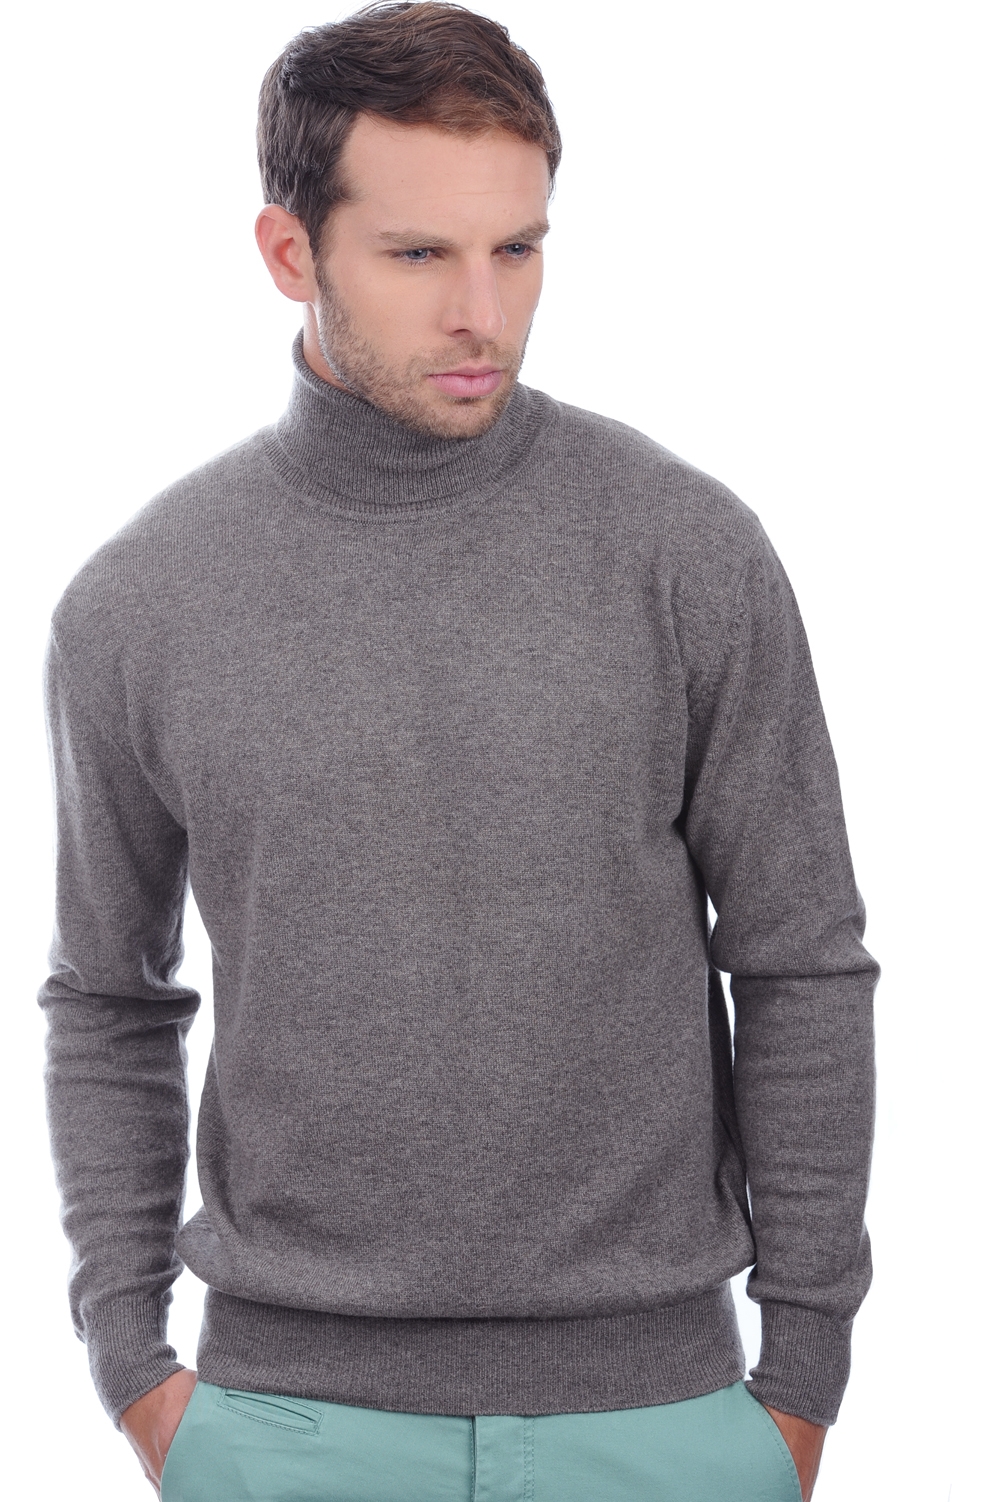 Cachemire pull homme col roule edgar marmotte chine 2xl